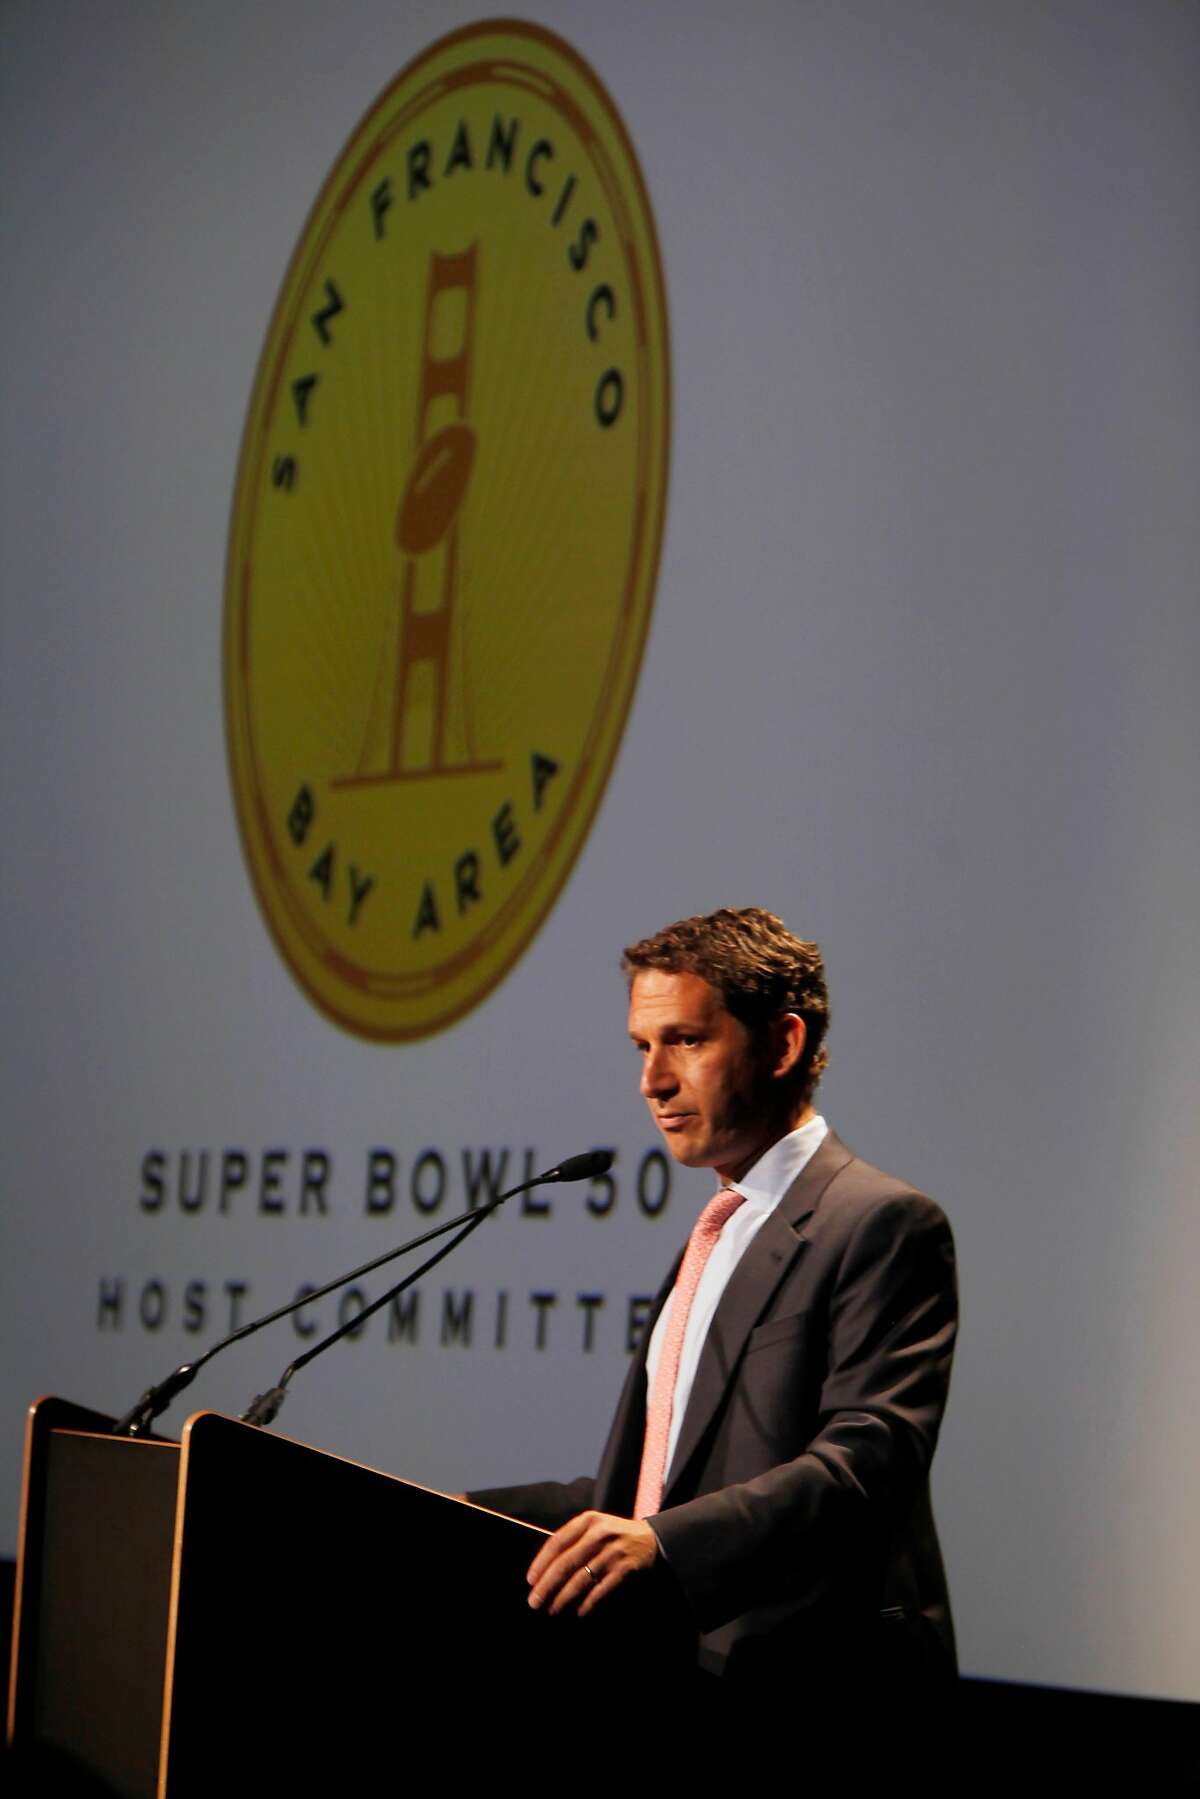 Daniel Lurie, Chair, San Francisco Bay Area Super Bowl 50 Host Committee speaks during a press conference updating plans for the 2016 Superbowl held by the San Francisco Bay Area Super Bowl 50 Host Committee in the Kanbar Forum at the Exploratorium on Thursday June 5, 2014 in San Francisco, Calif.